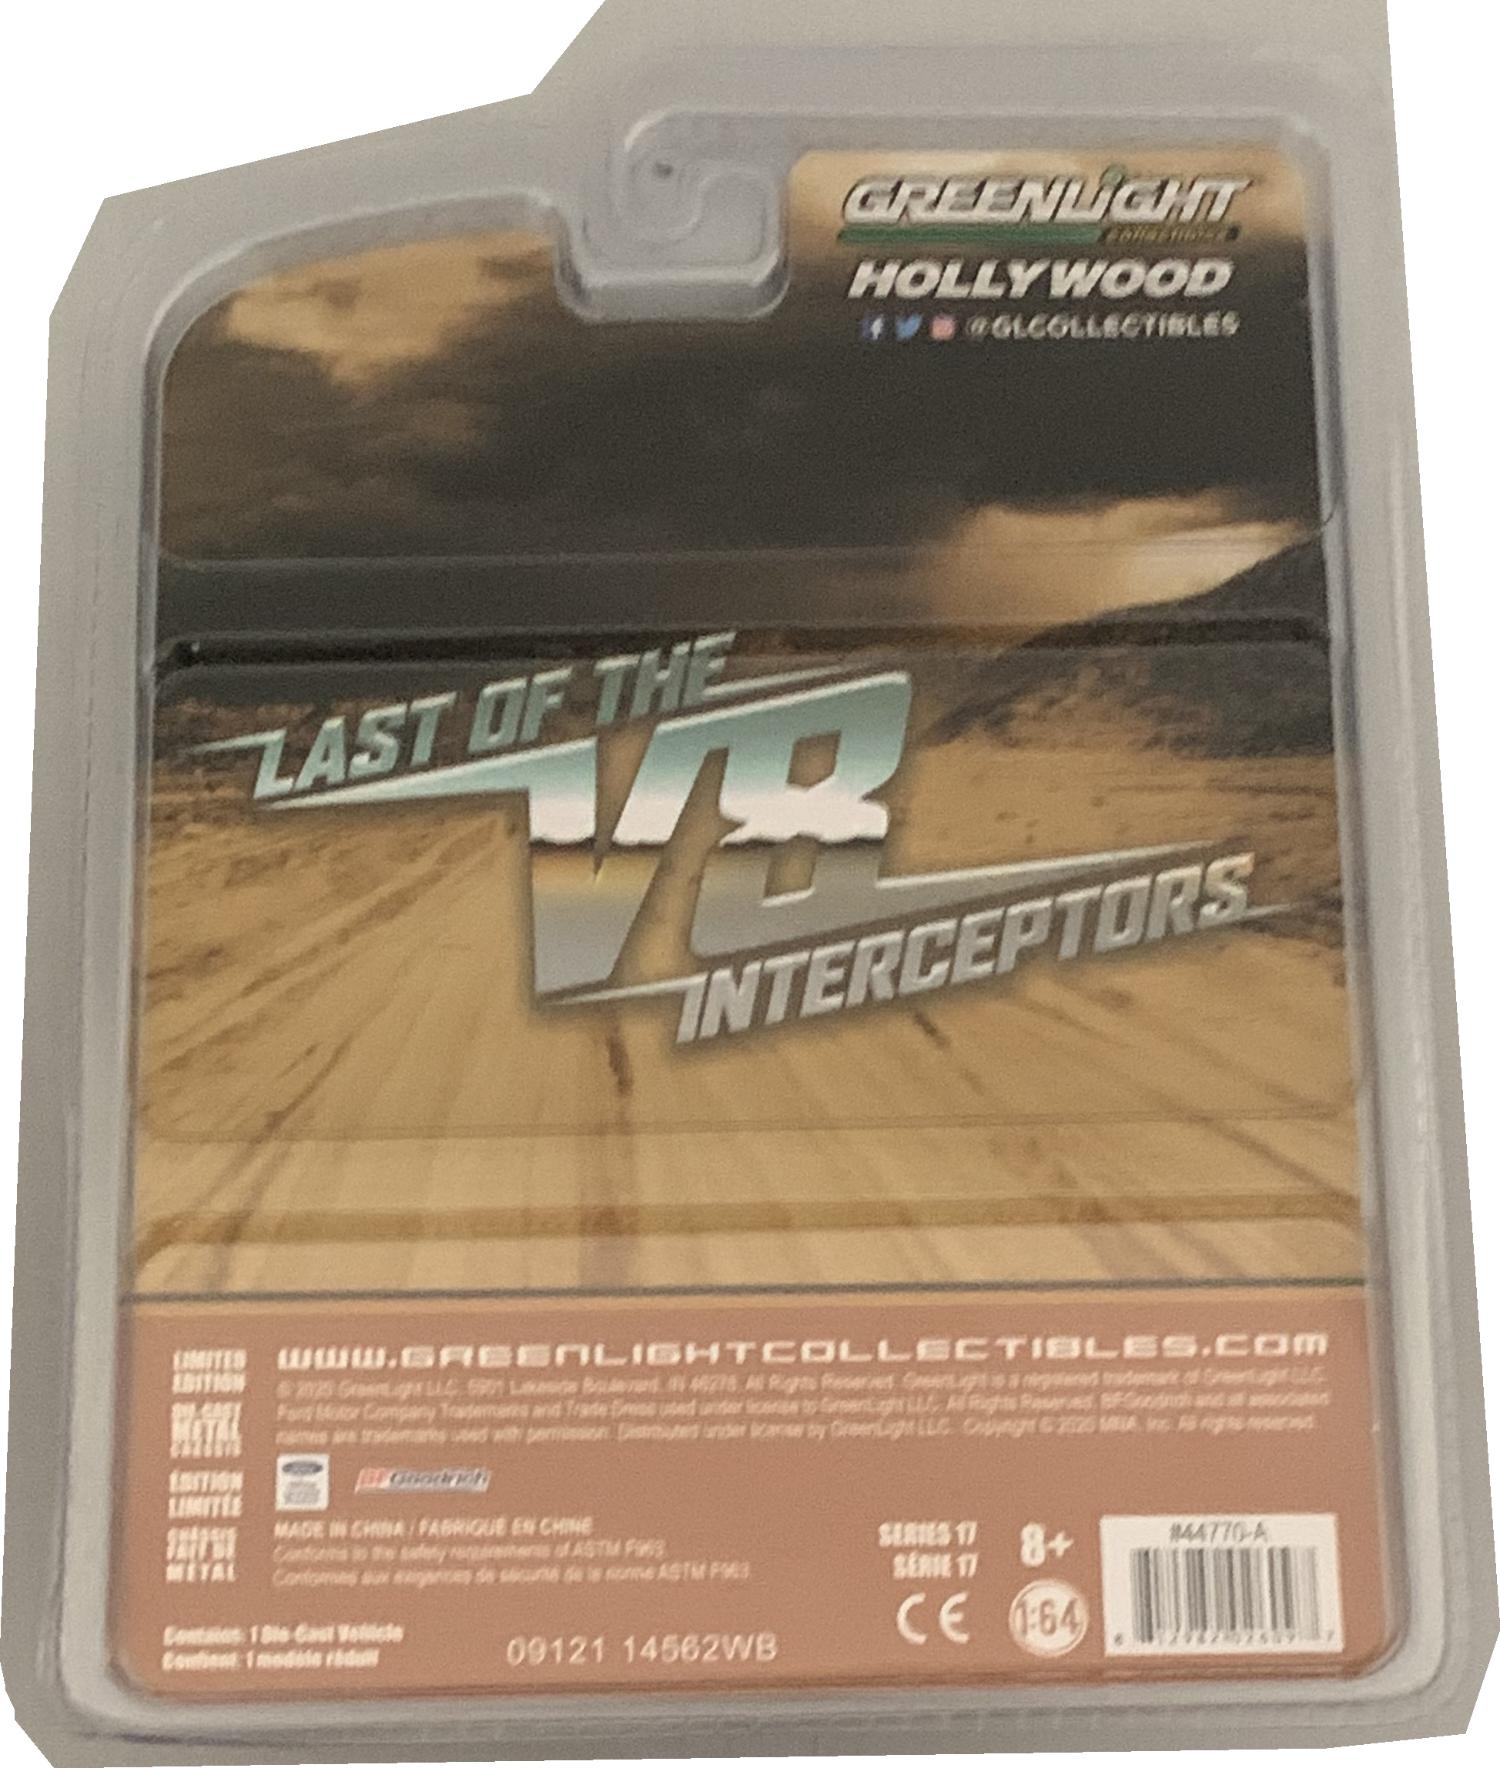 Model is presented in blister packaging in Last of the V8 Interceptors themed boxed packaging. Limited Edition model with number on base of the car